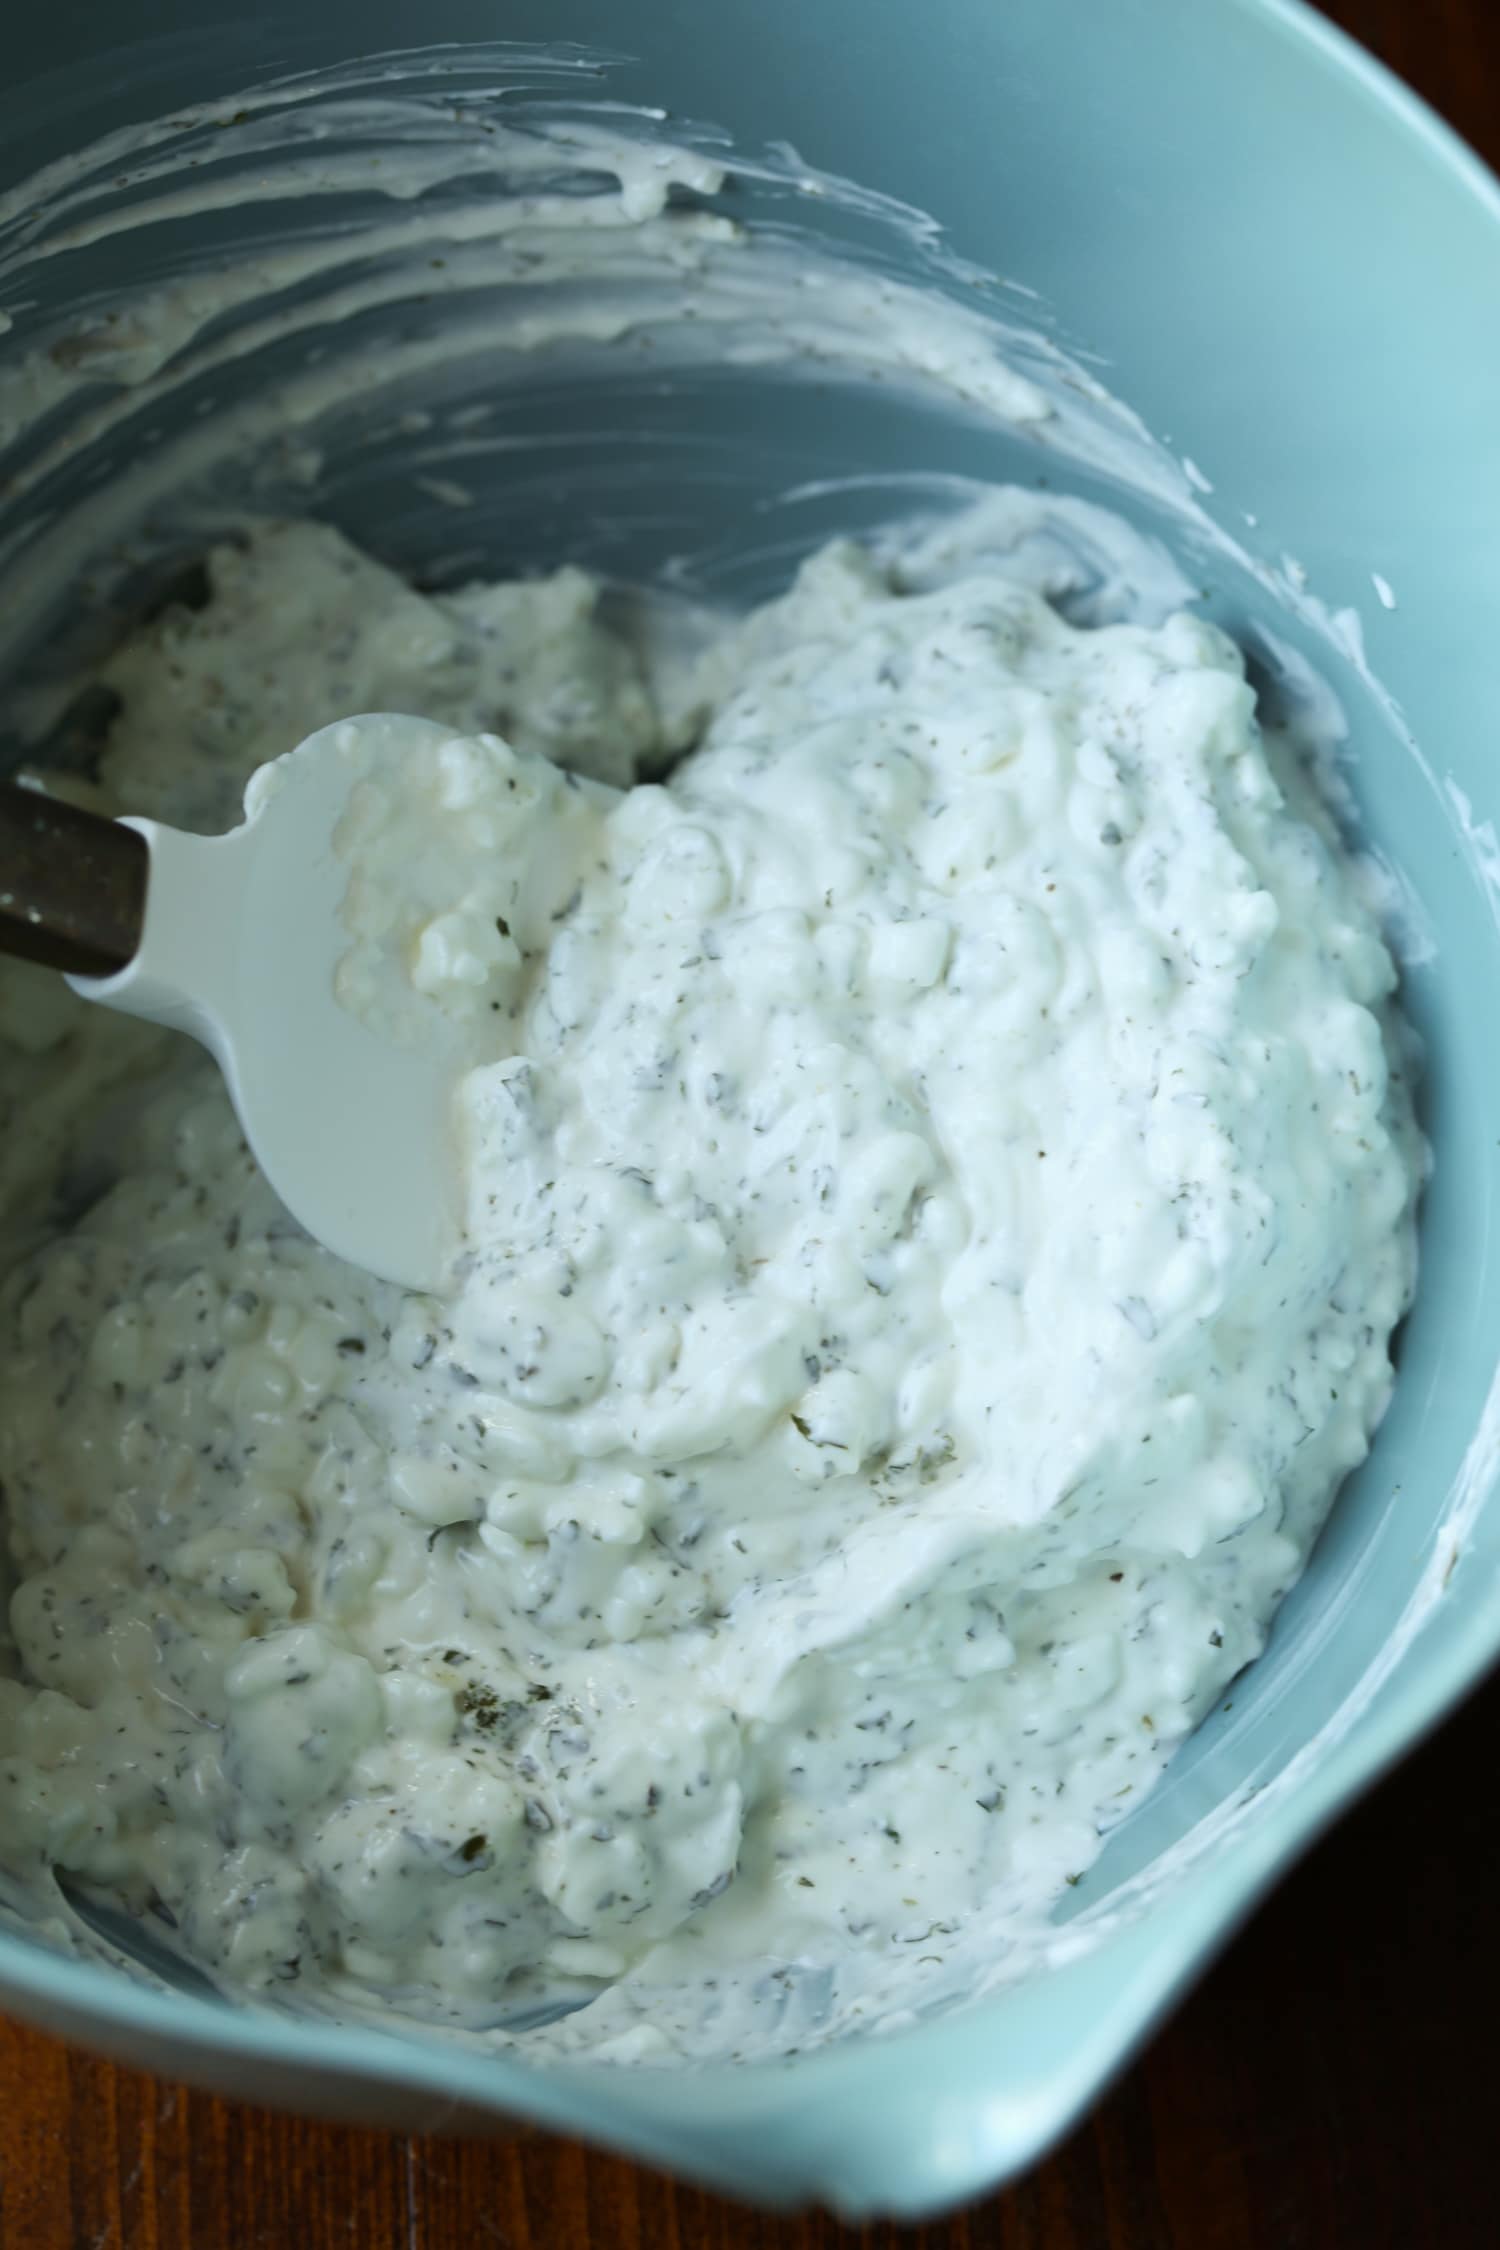 Sour cream is stirred together with cottage cheese and herbs.